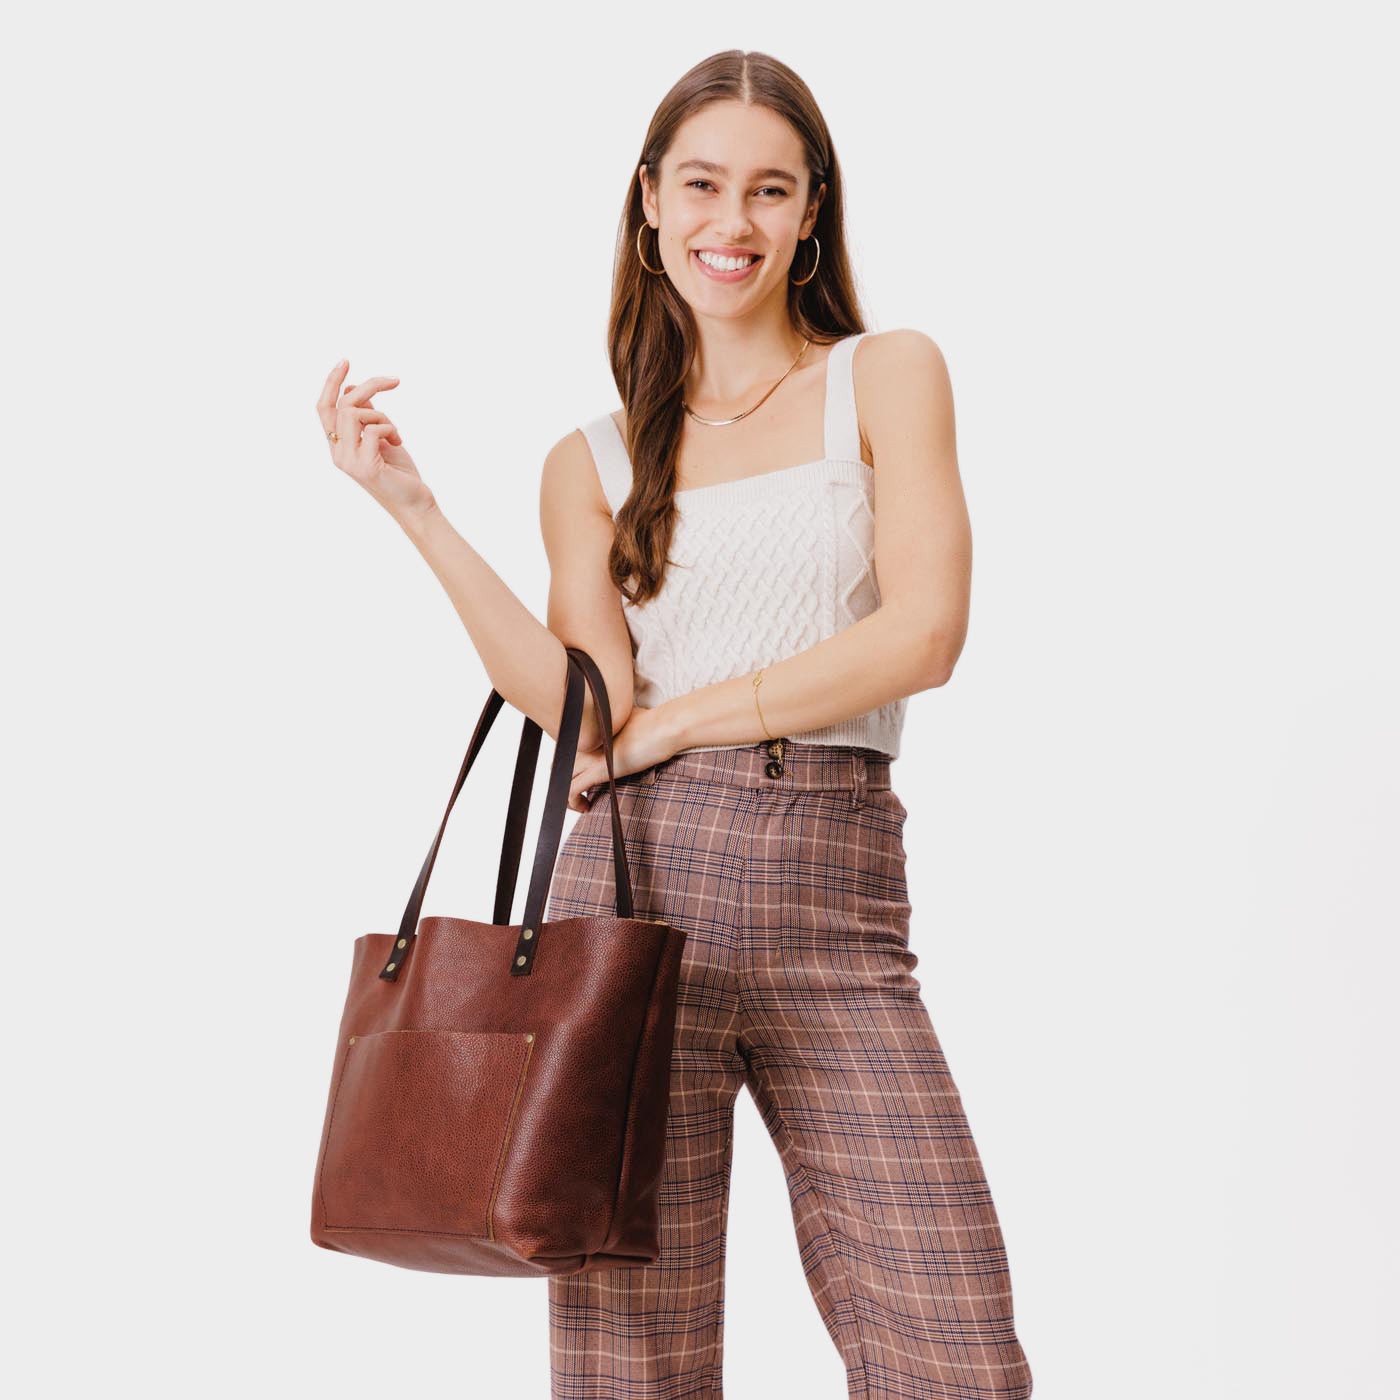 Perfect in Leather Tote Bag - Saddle Brown